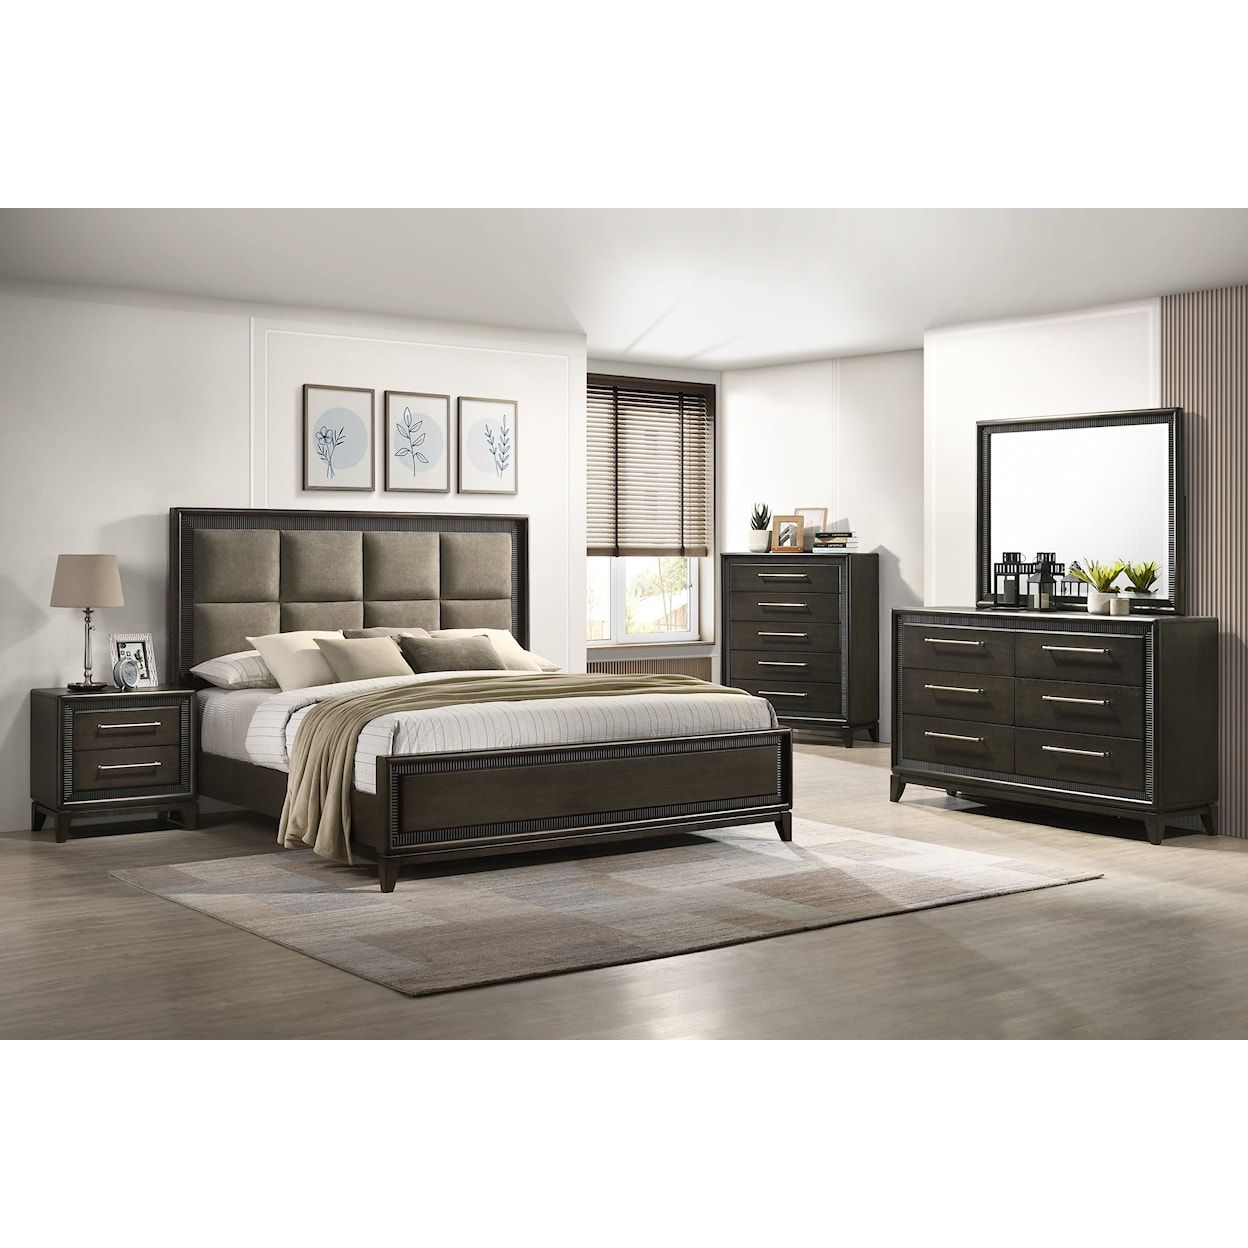 CM SARATOGA Queen Upholstered Bed